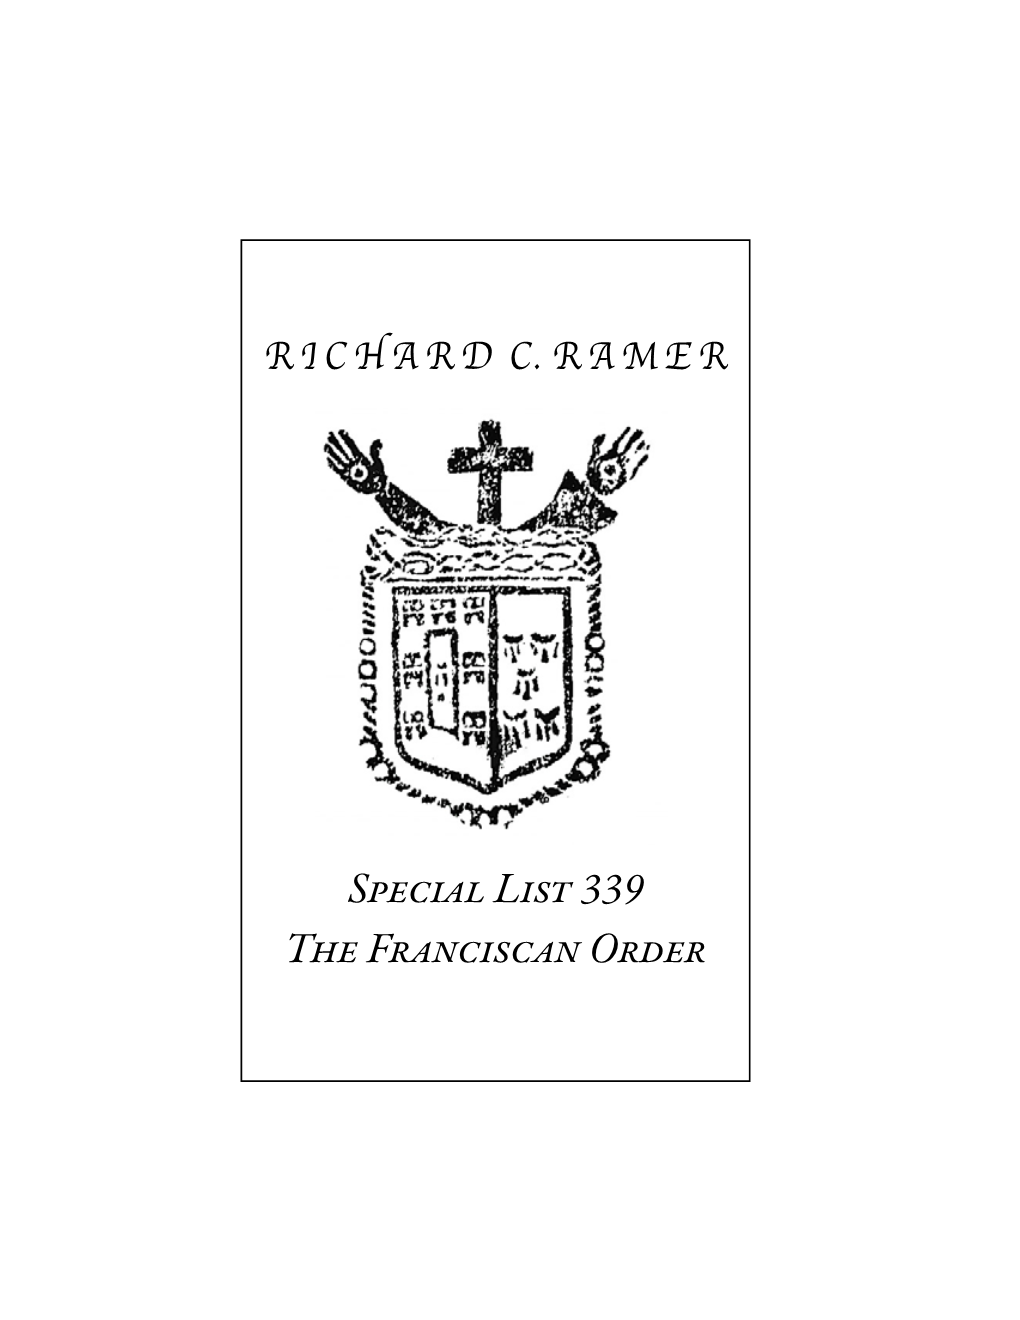 The Franciscan Order